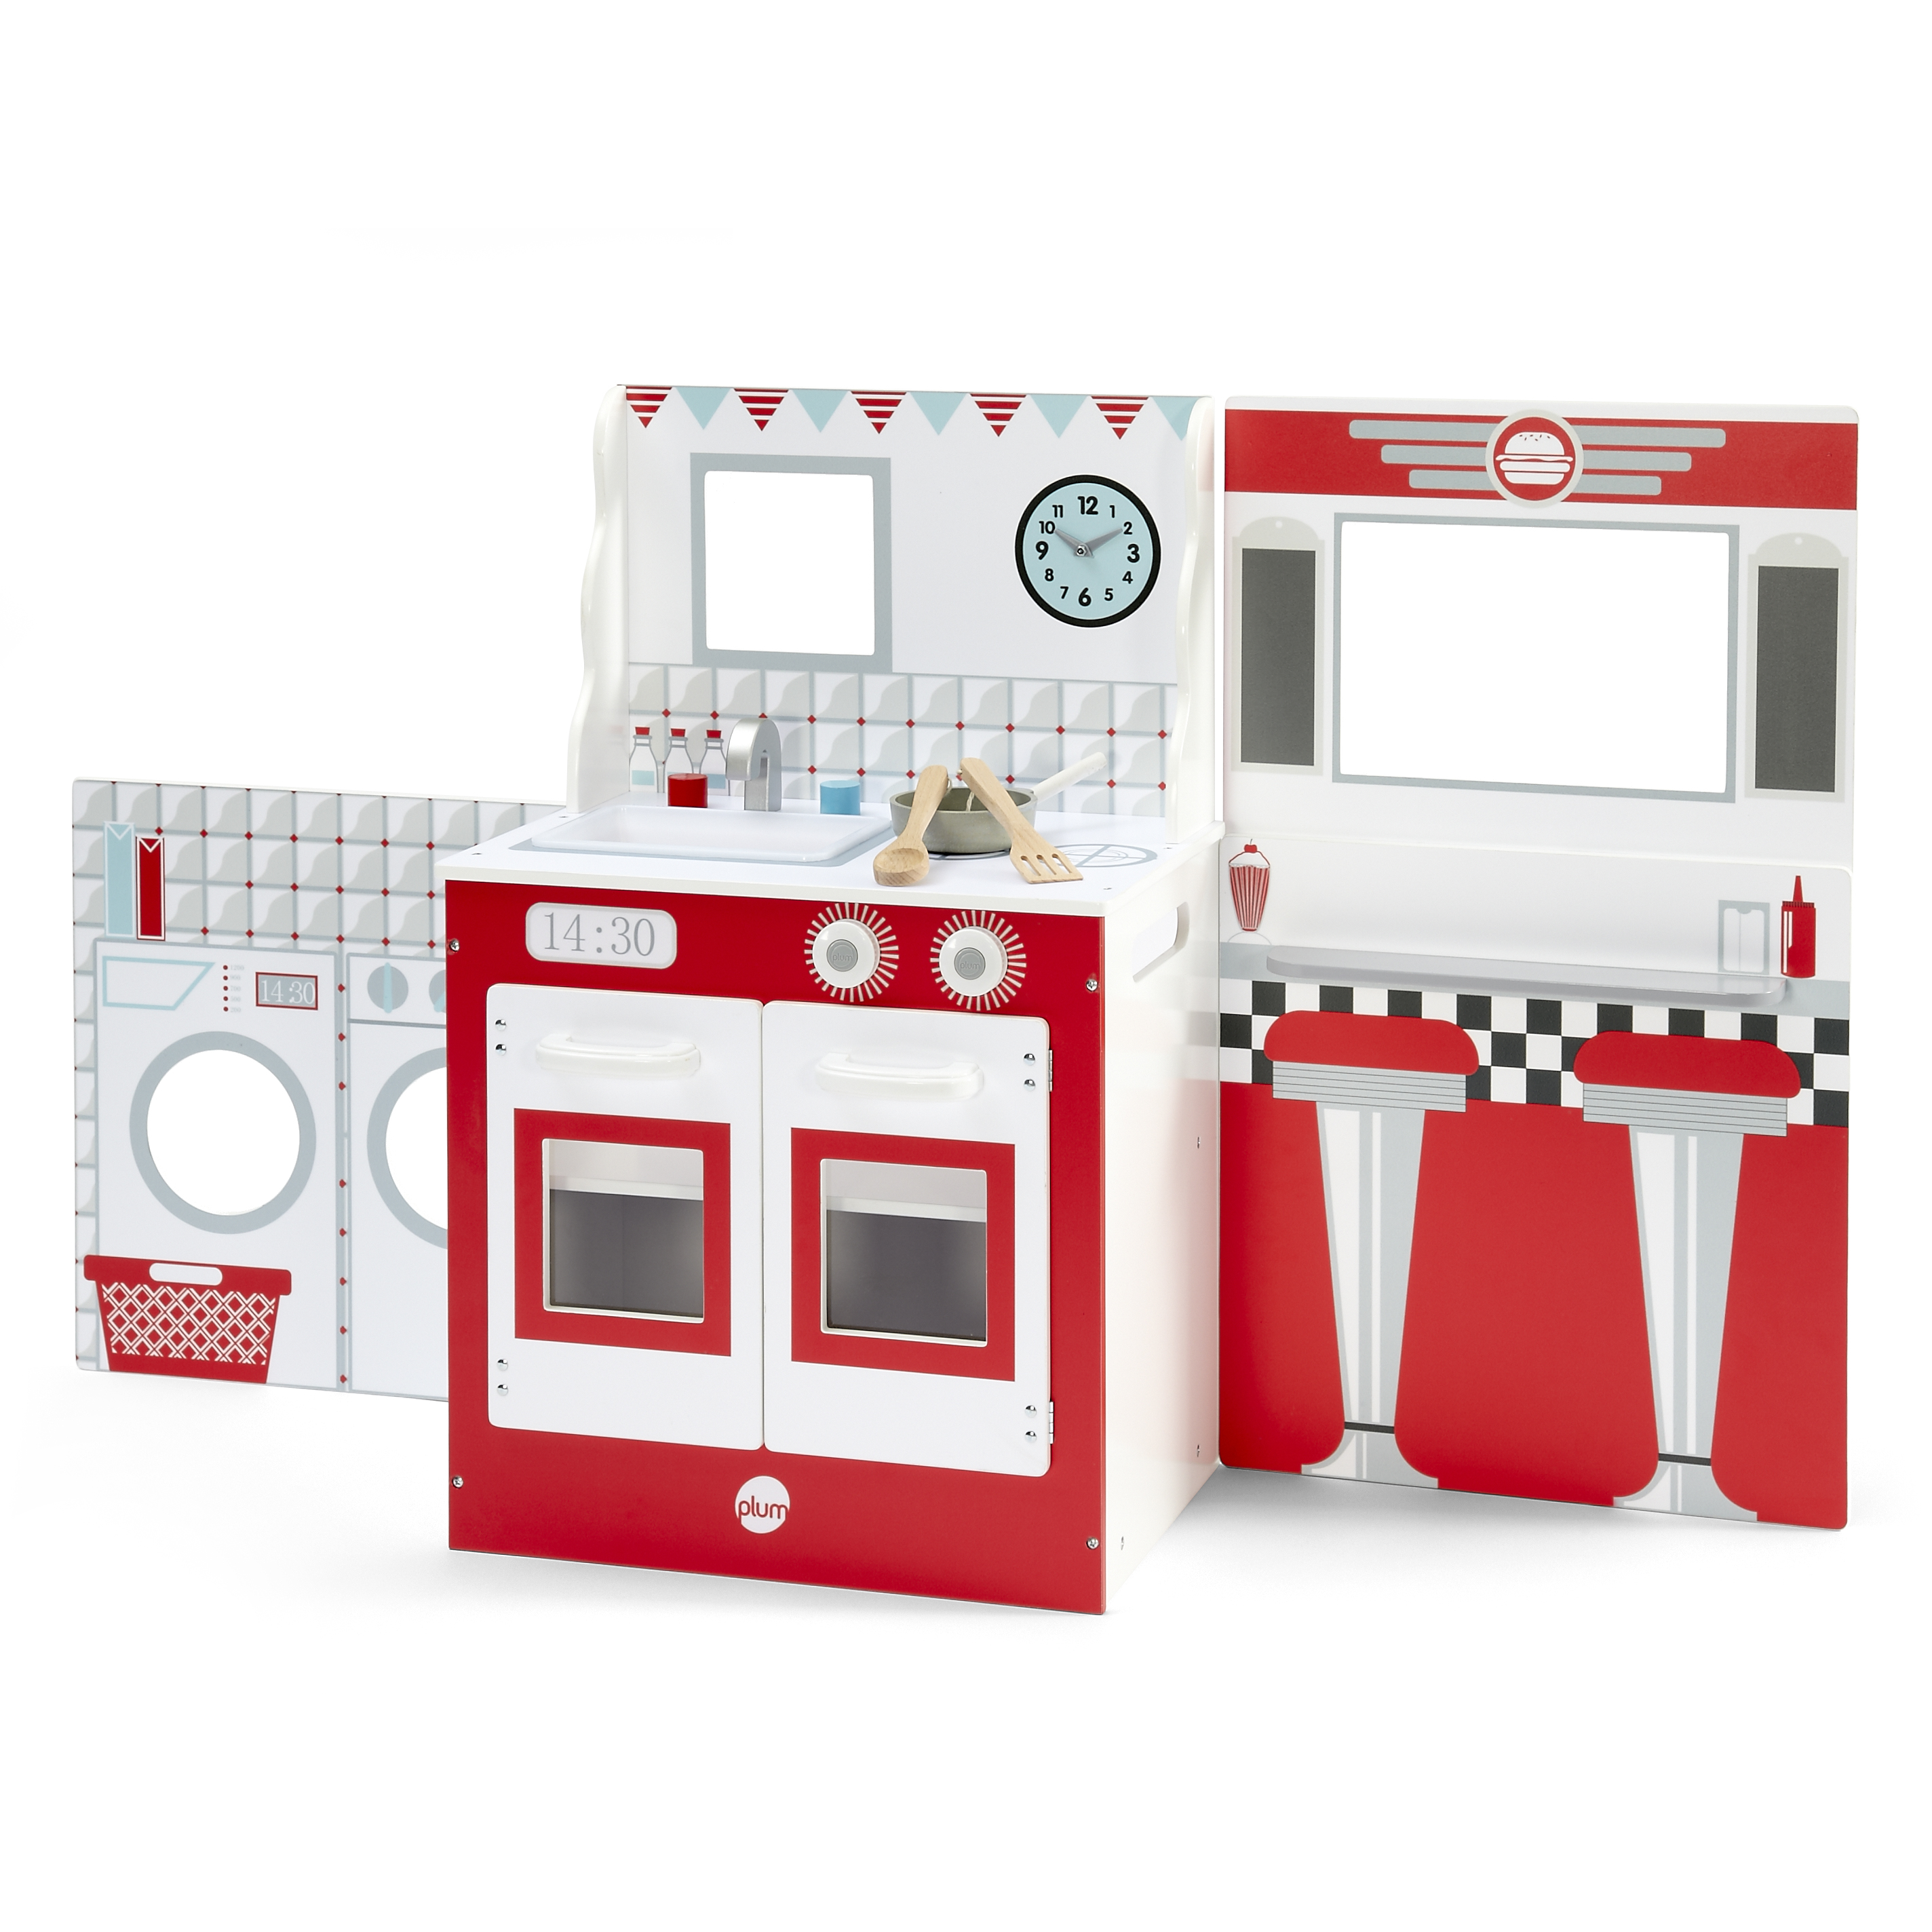 Plum 2 In 1 Kitchen Dolls House - image 2 of 9